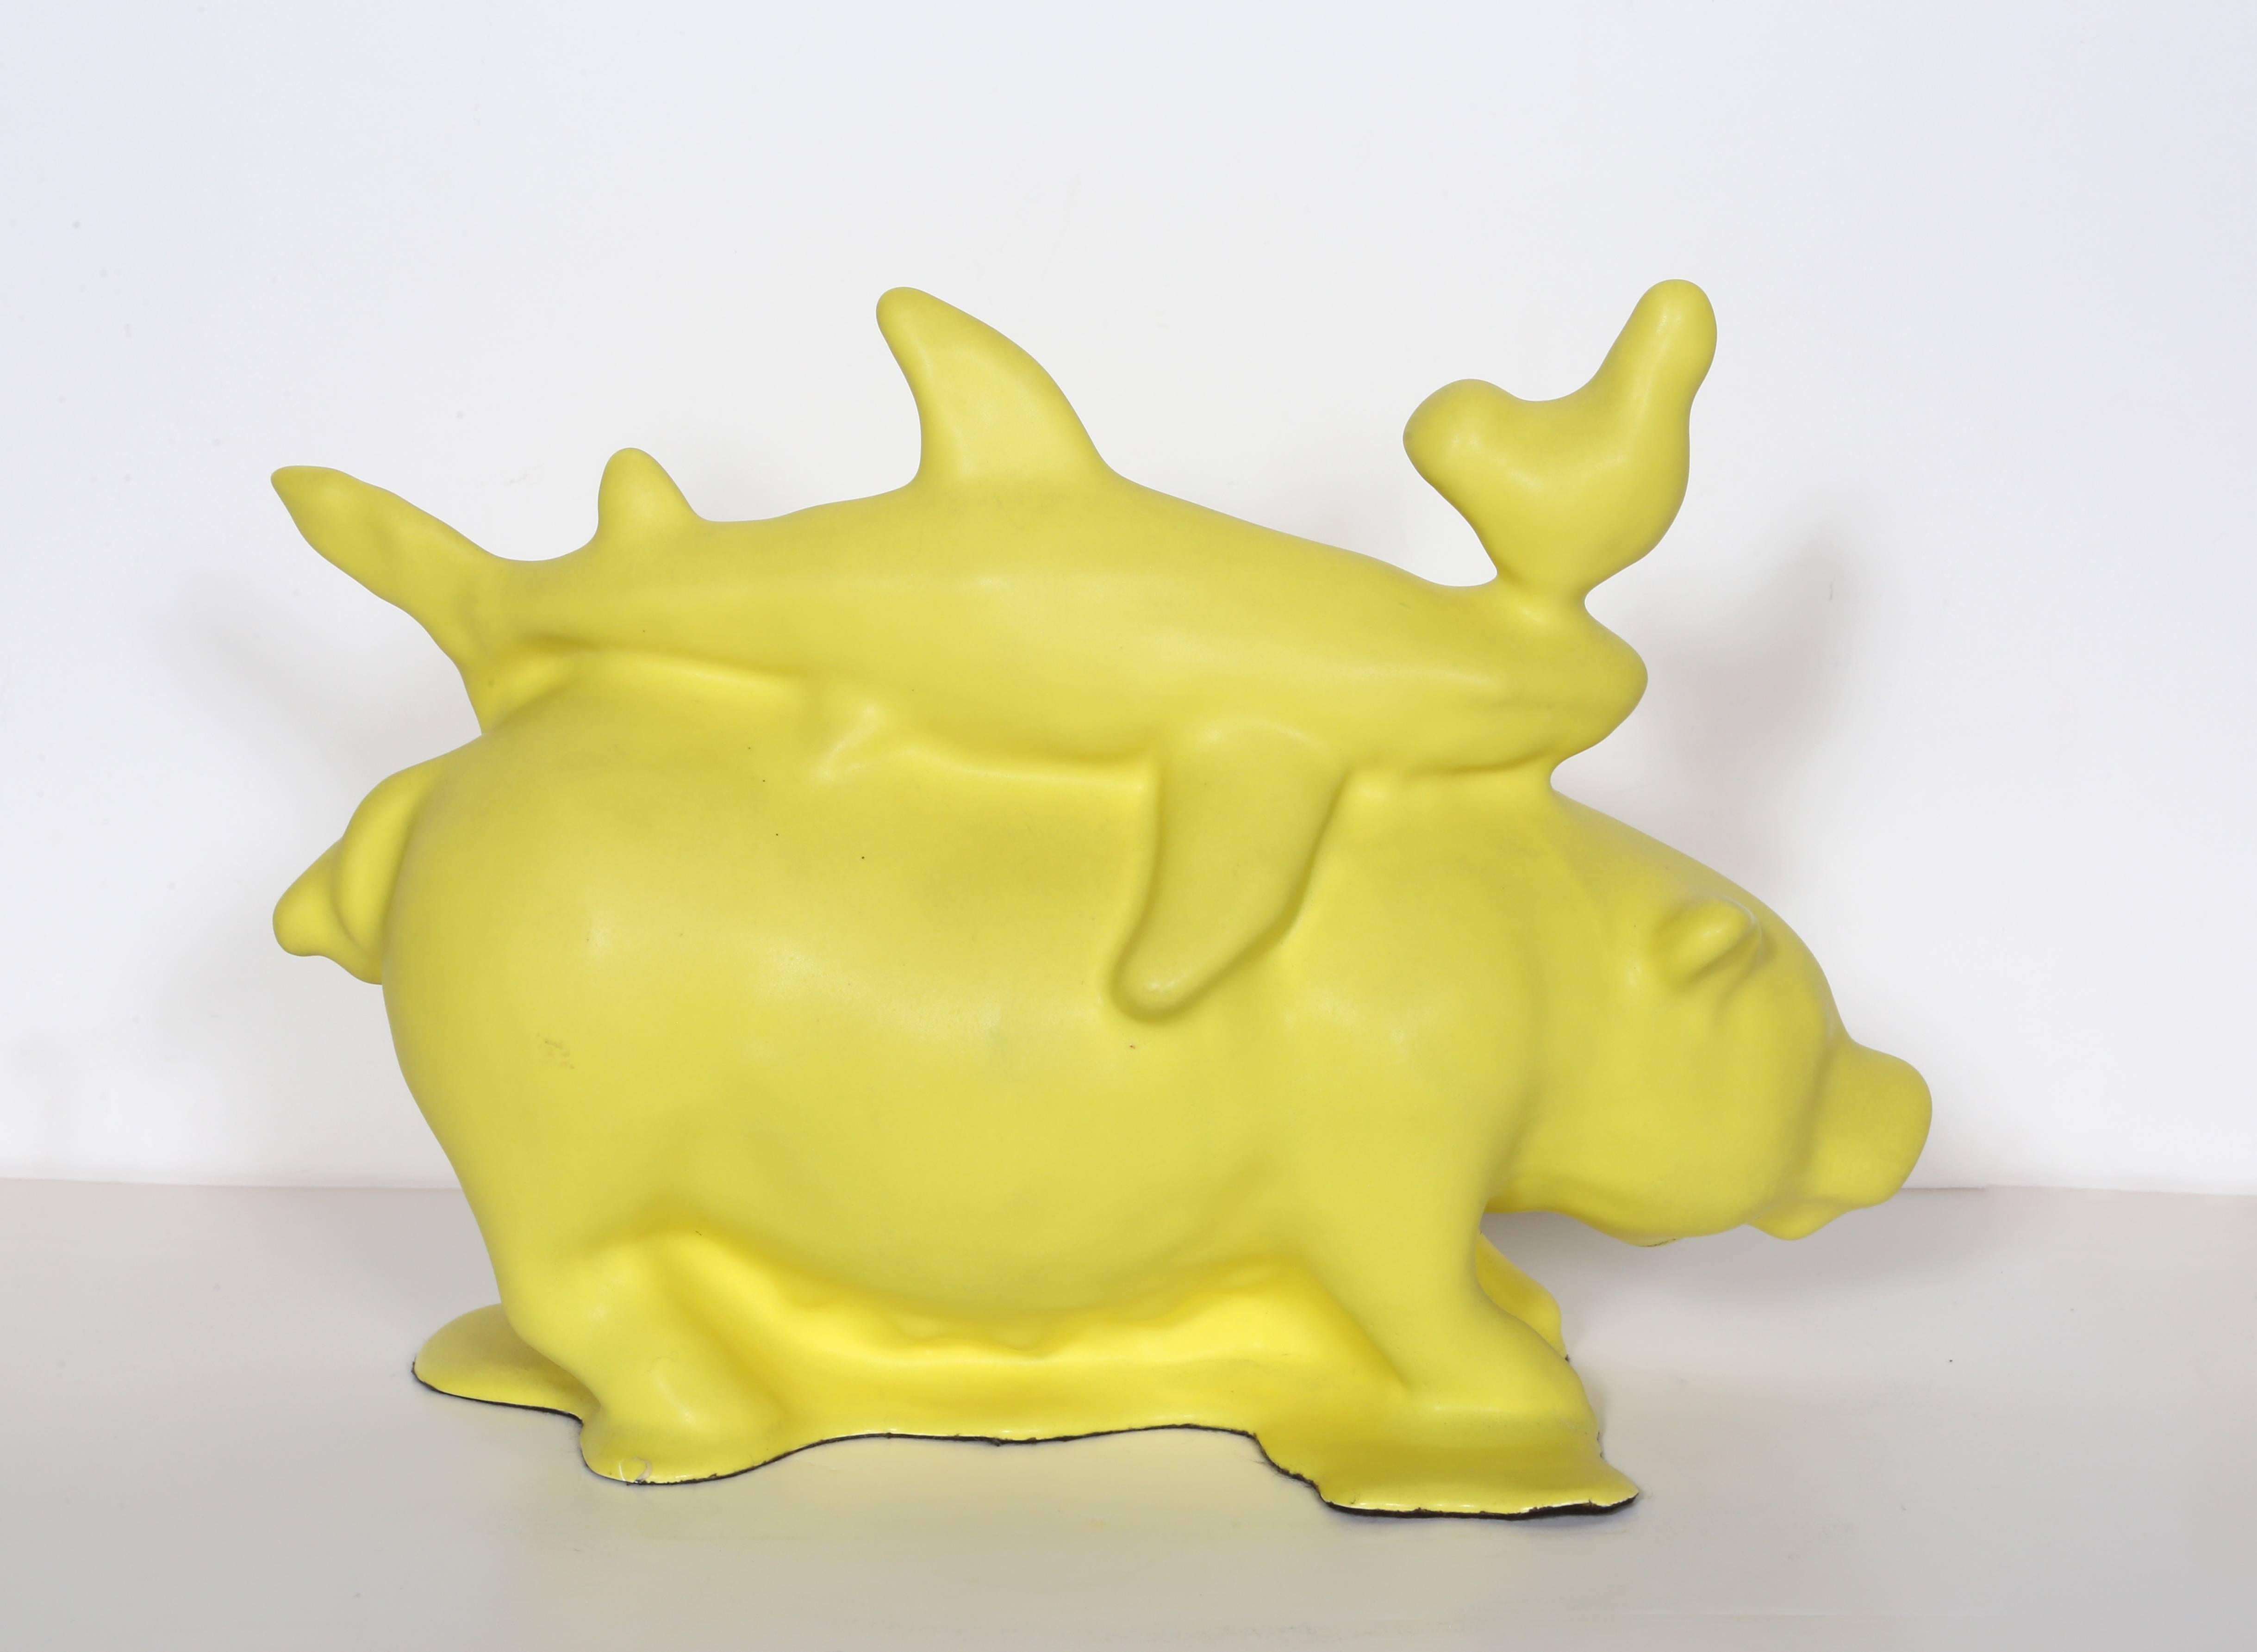 Pig, Shark, Chicken from The Gathering, Ceramic by Bertjan Pot For Sale 2